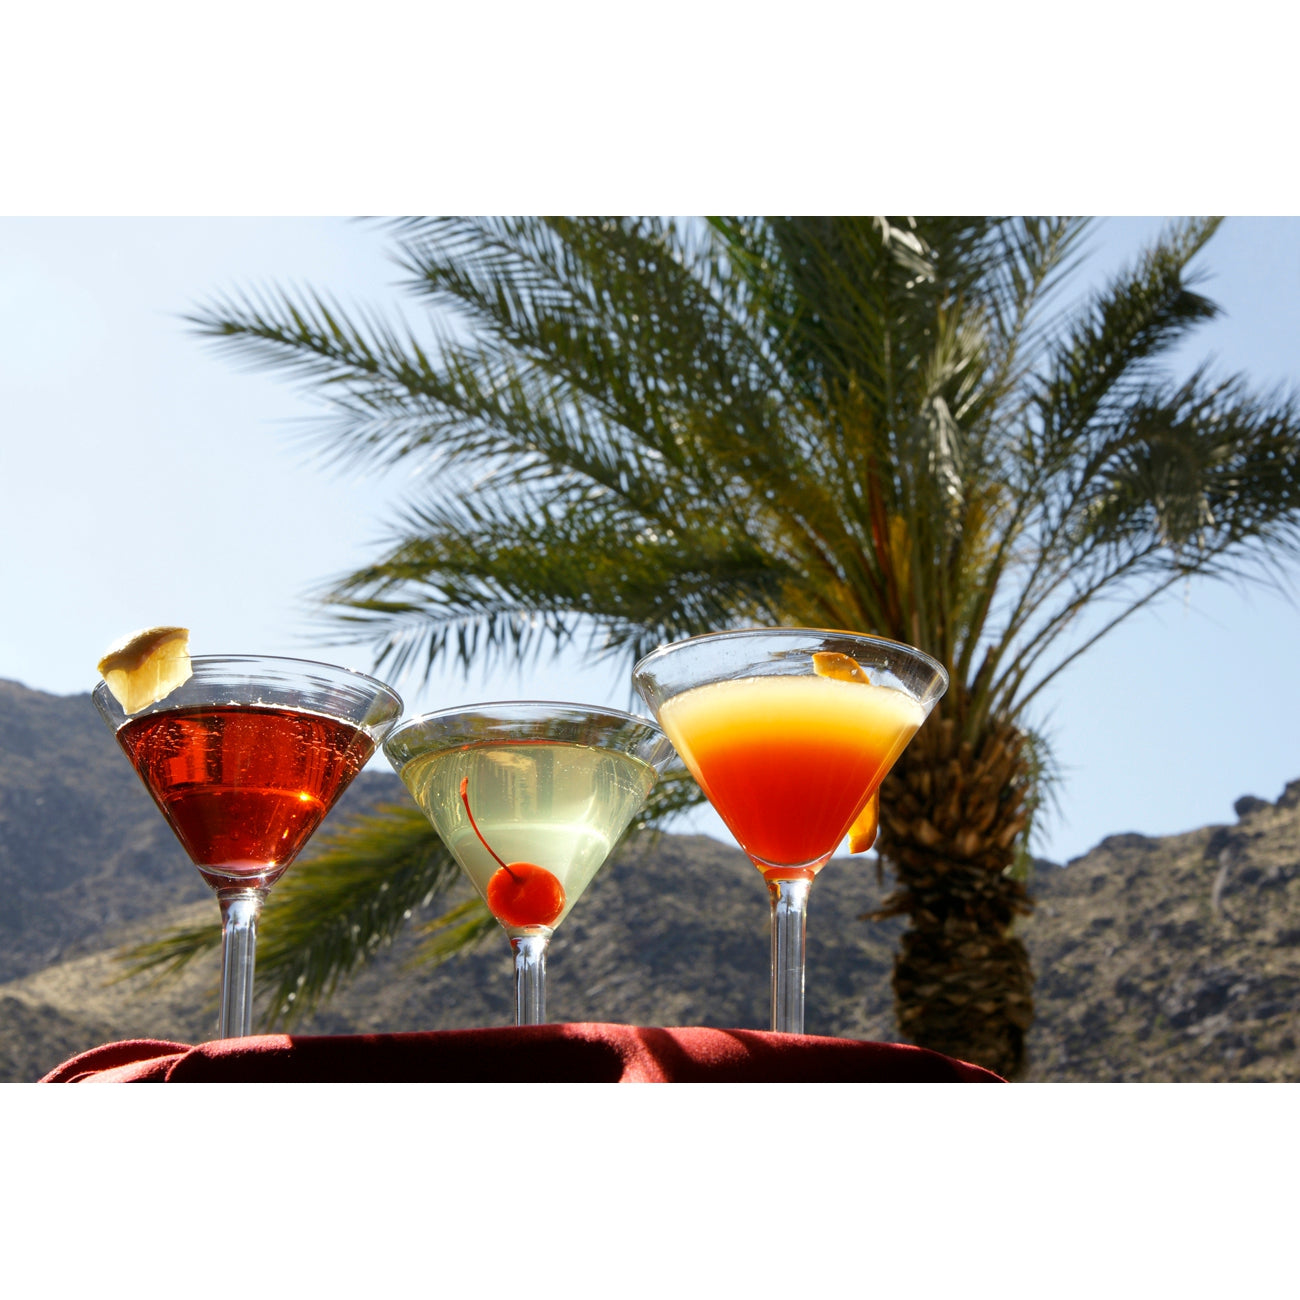 Martinis and Palm Trees Greeting Card